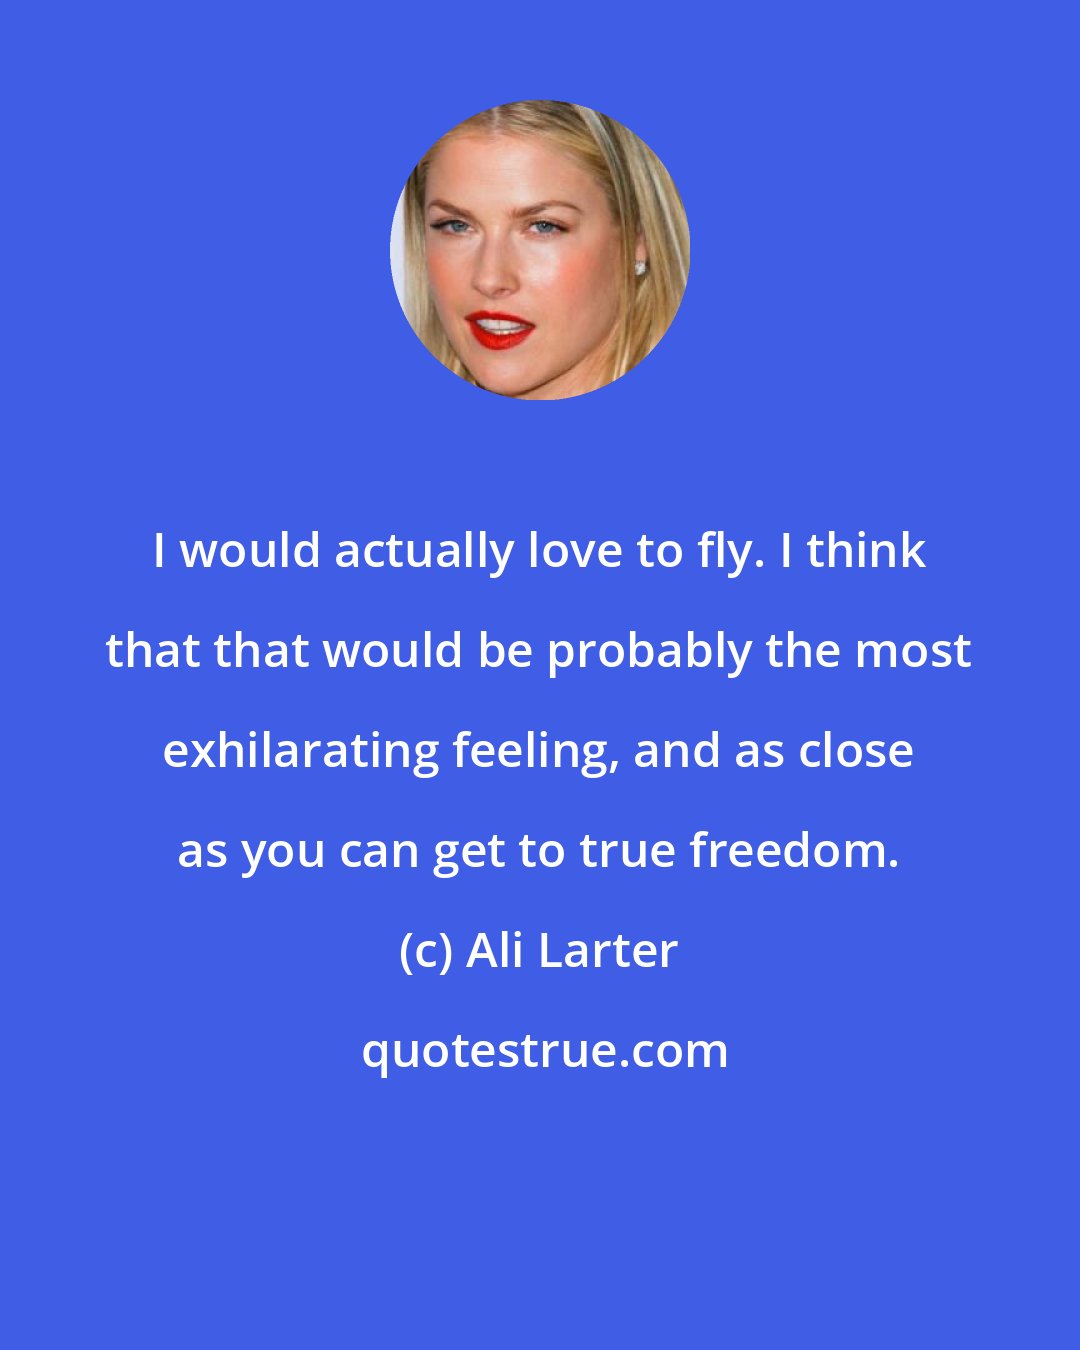 Ali Larter: I would actually love to fly. I think that that would be probably the most exhilarating feeling, and as close as you can get to true freedom.